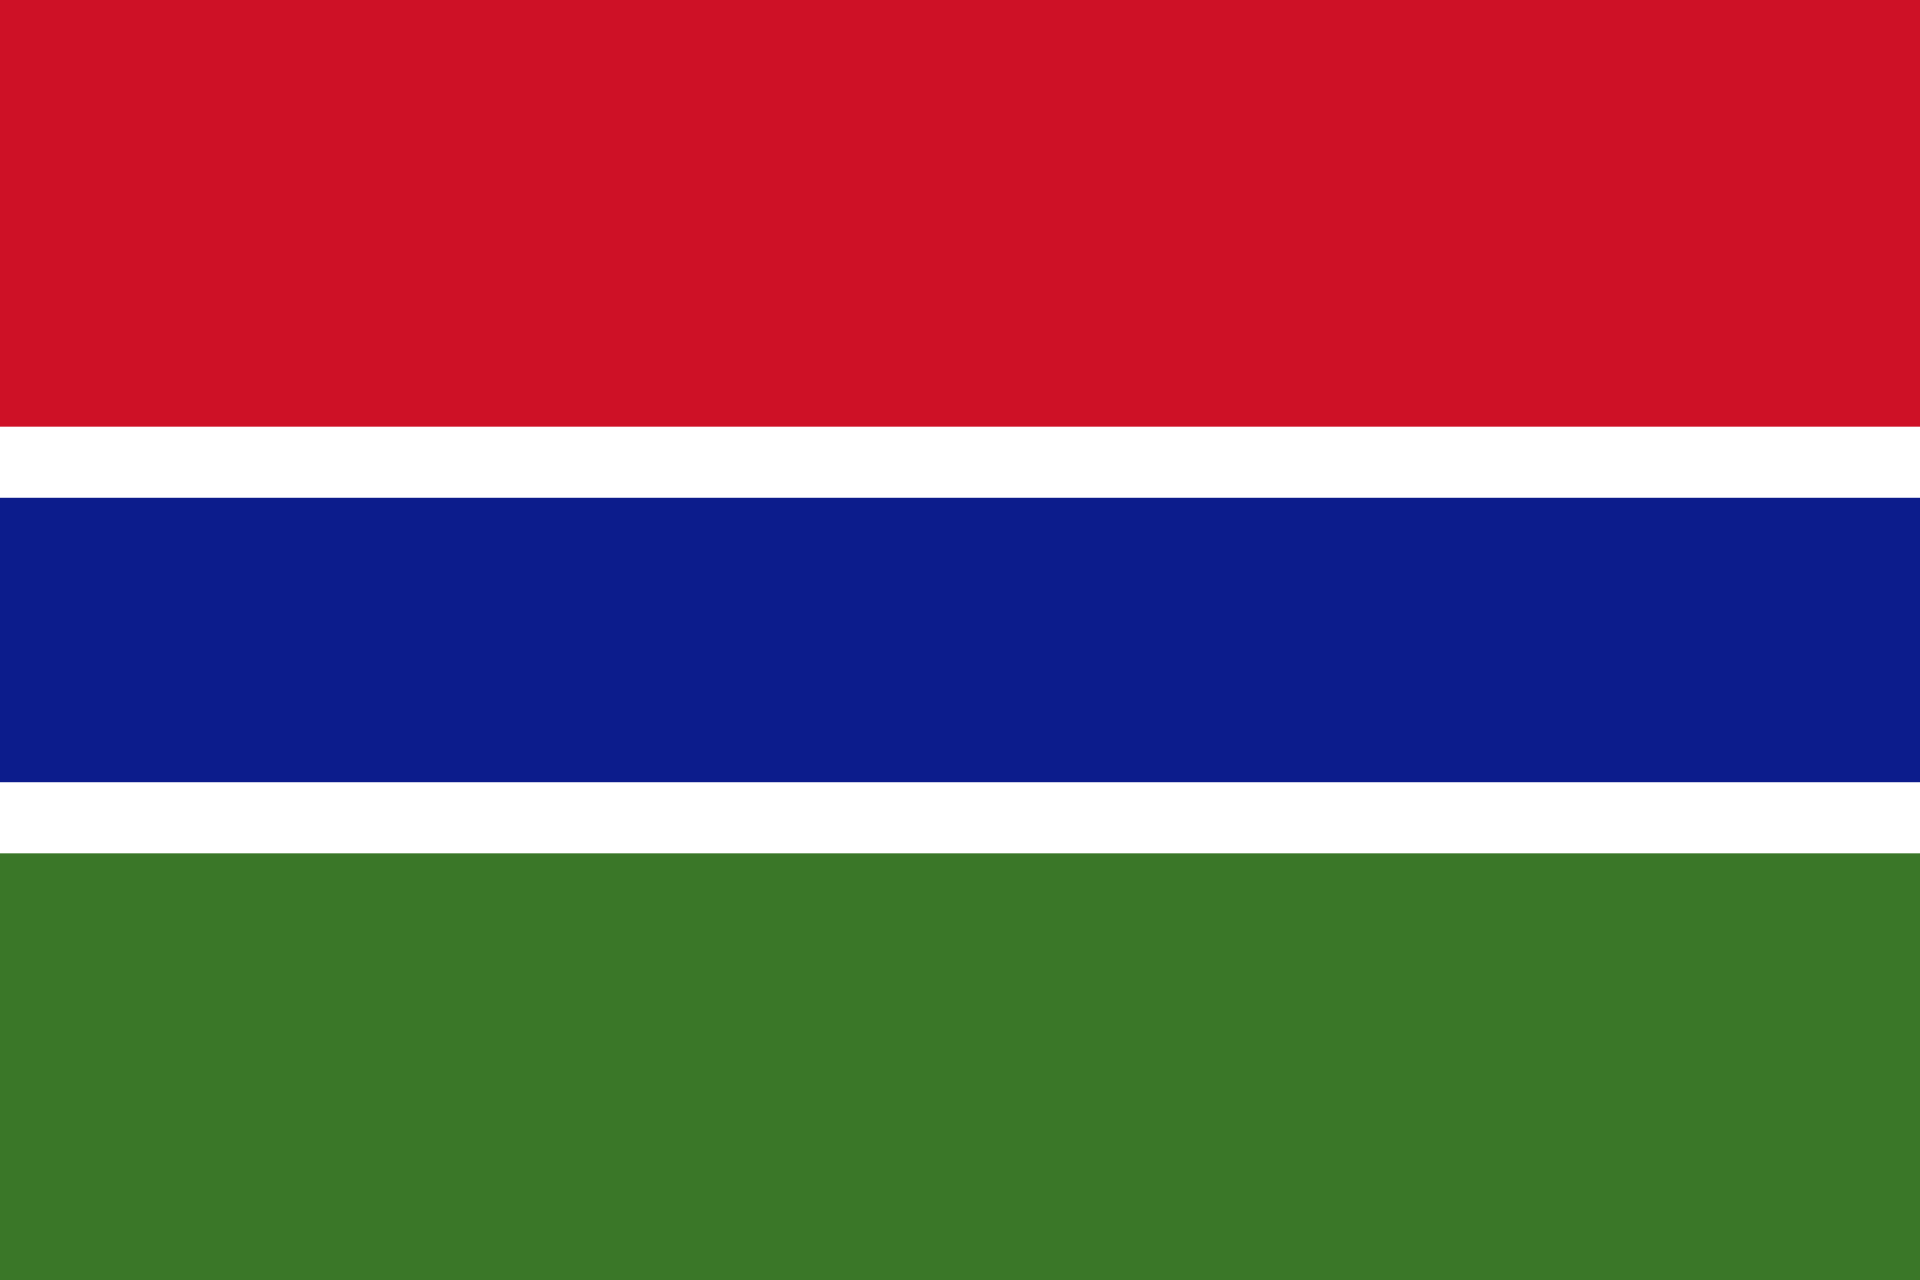 Cờ của Gambia